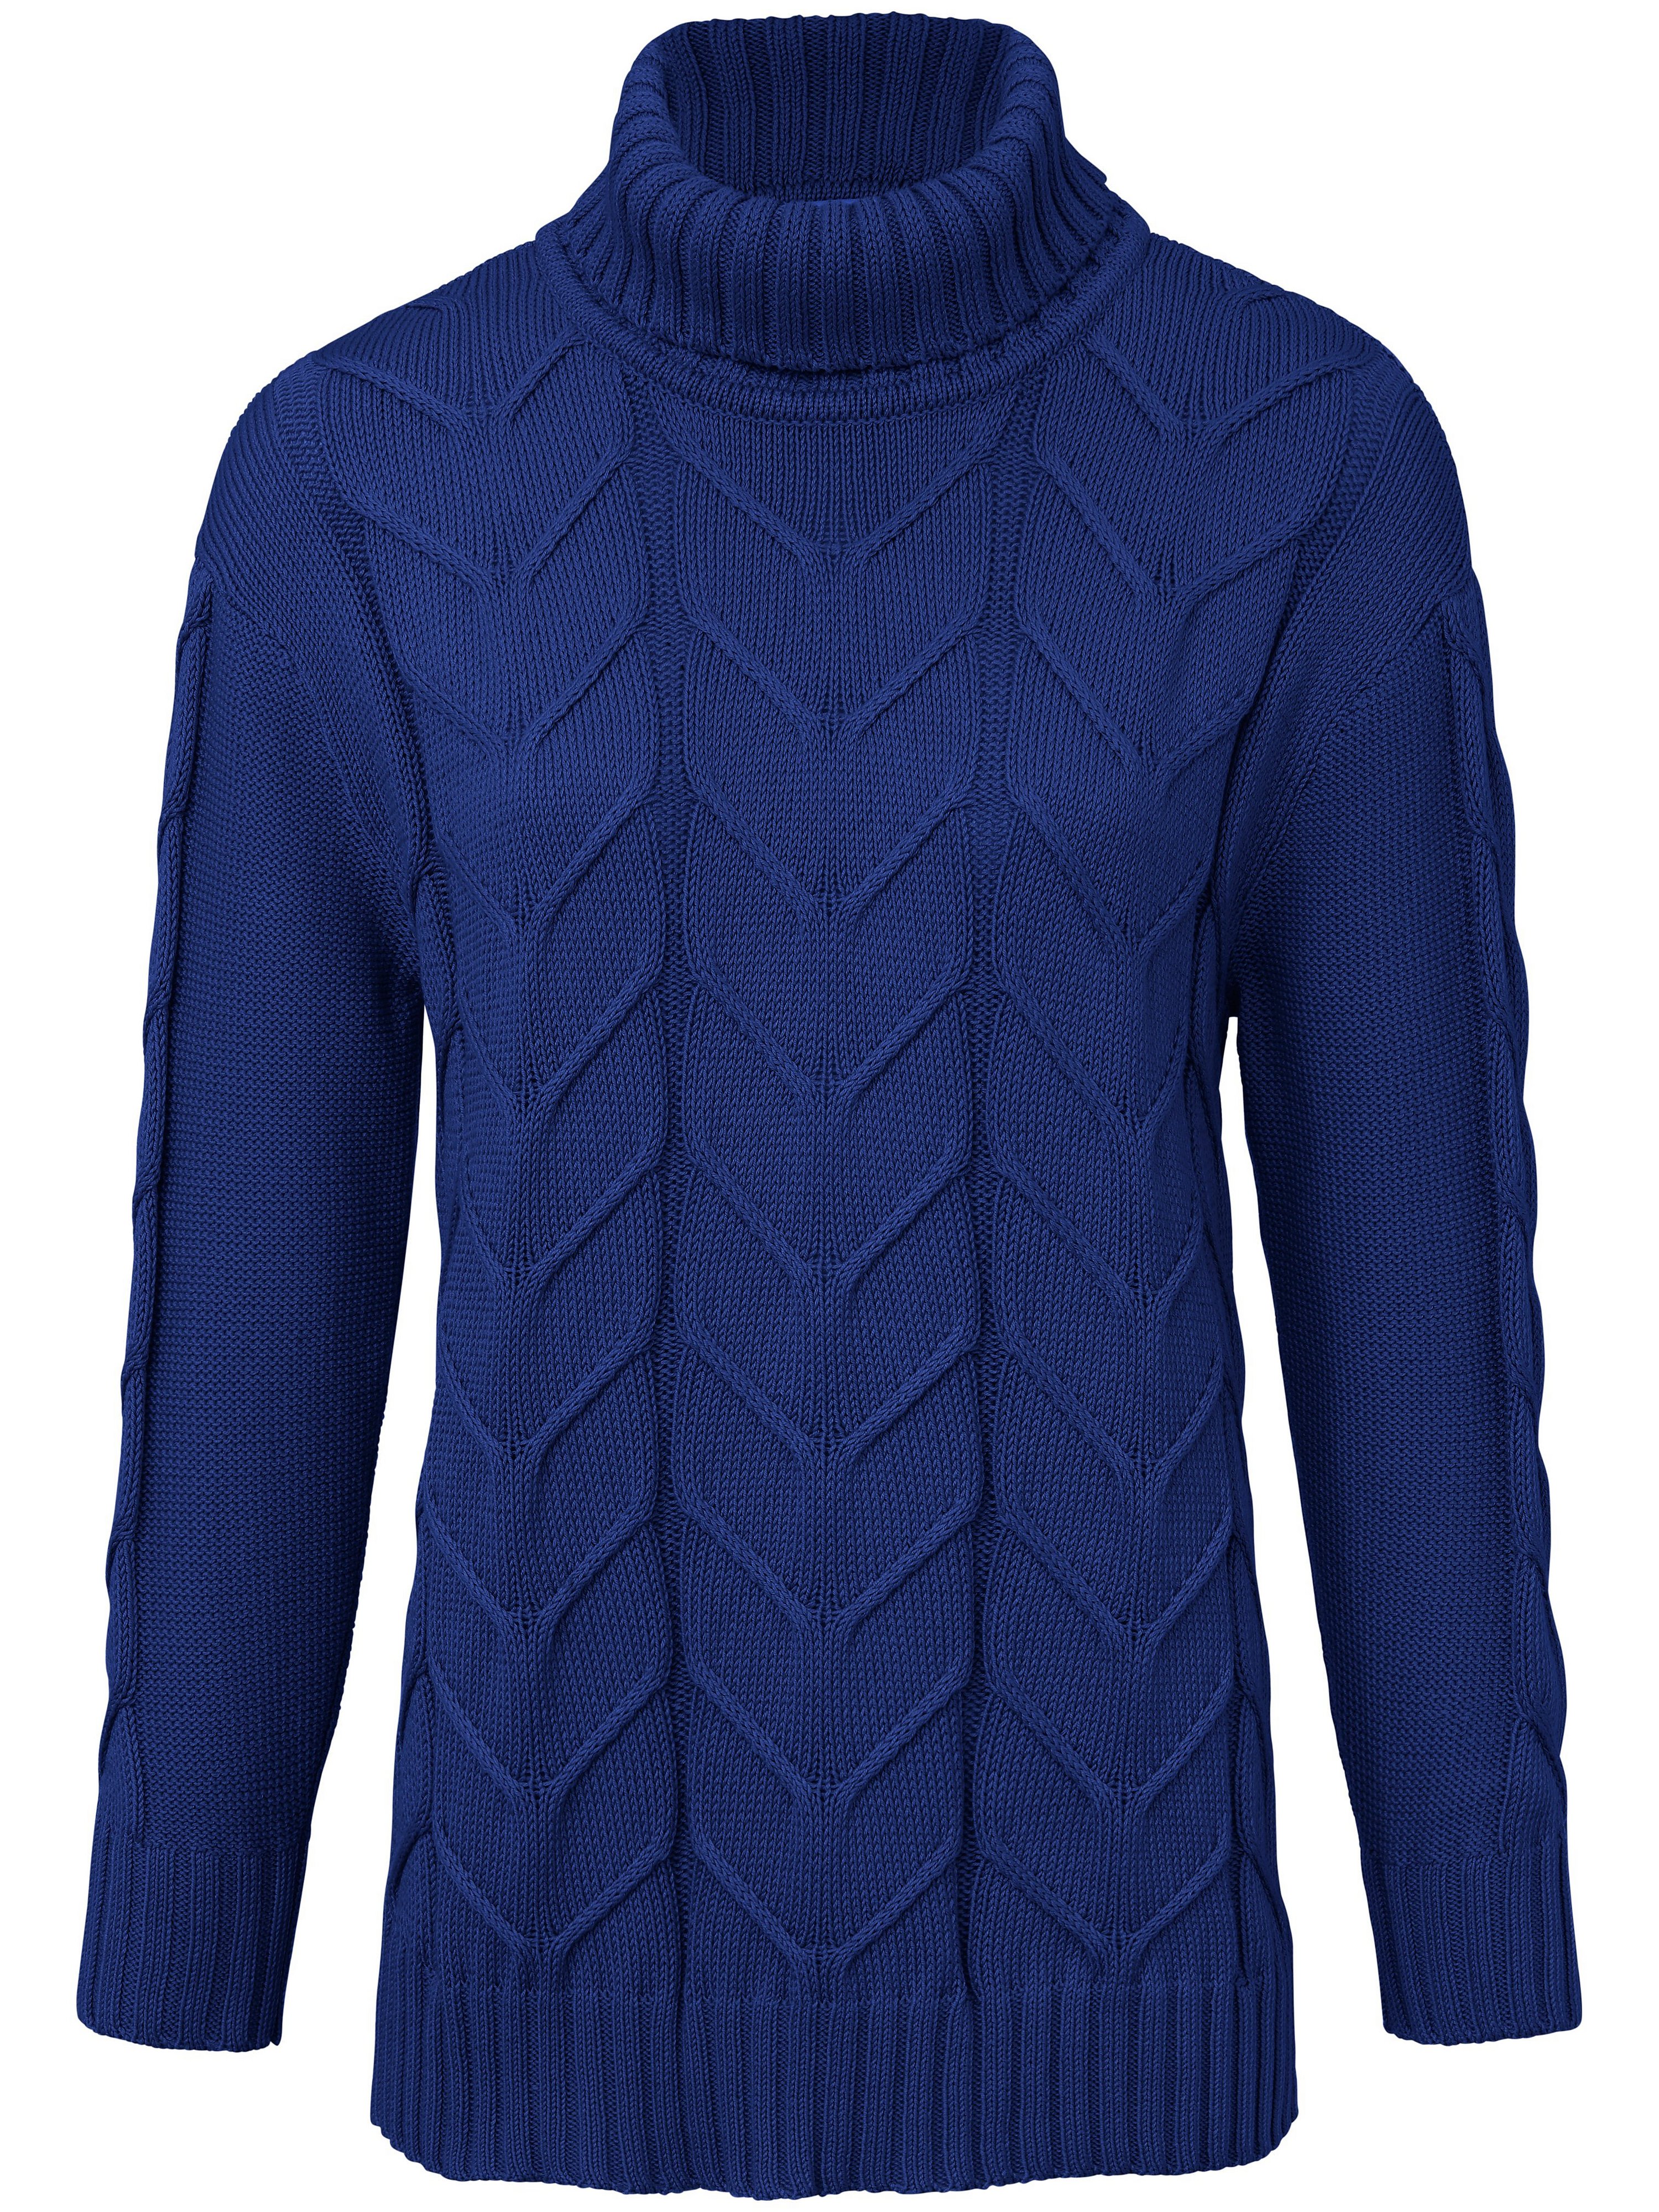 Le pull 100% coton  Looxent bleu taille 42